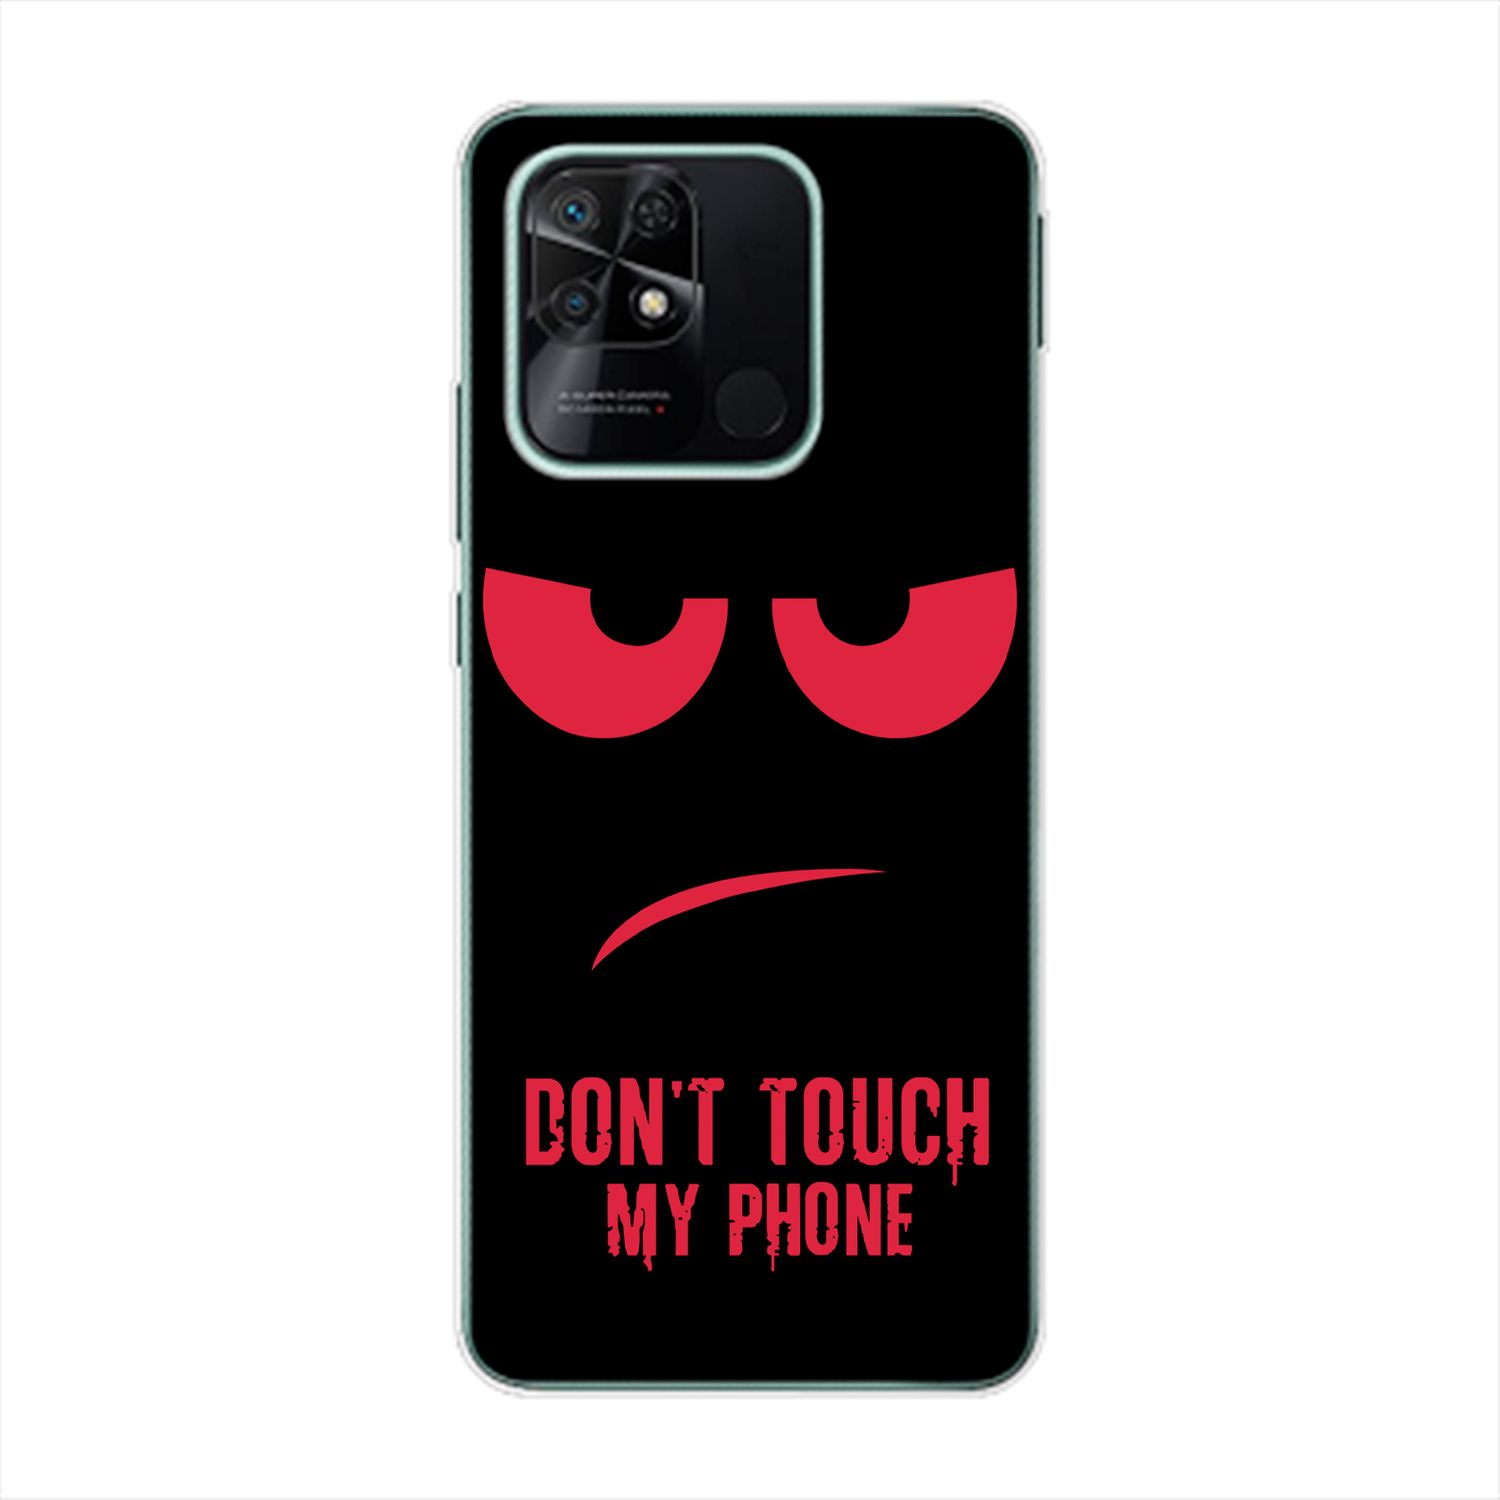 KÖNIG DESIGN Case, 10C, Backcover, Dont My Rot Xiaomi, Phone Redmi Touch